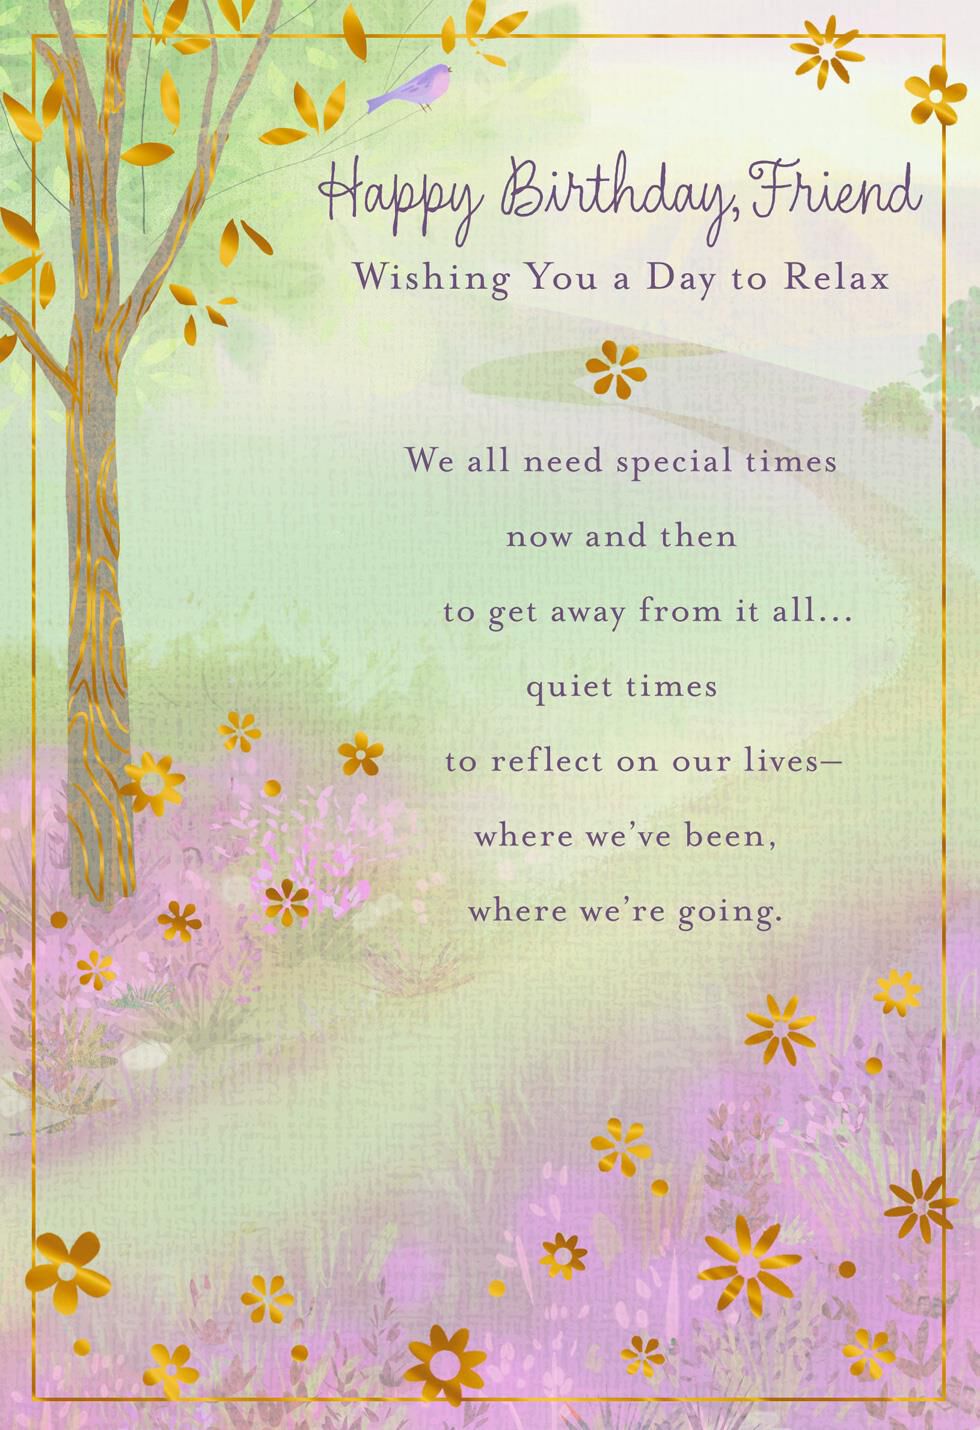 Day to Relax Tree Birthday Card for Friend - Greeting Cards - Hallmark